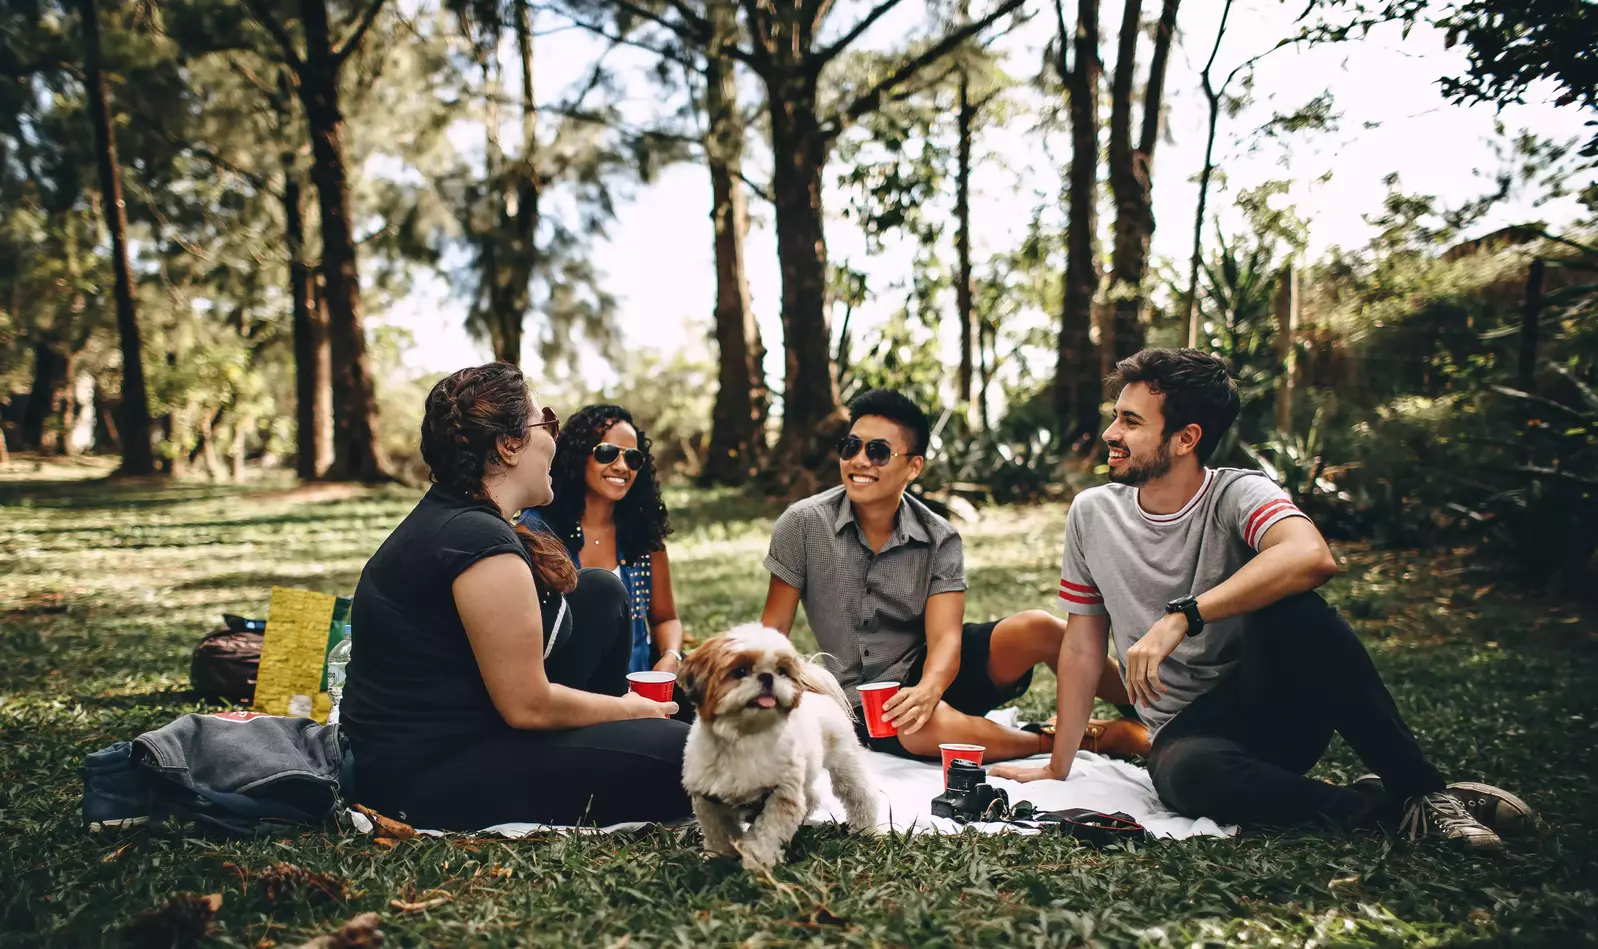 group of people having a picnic outdoors